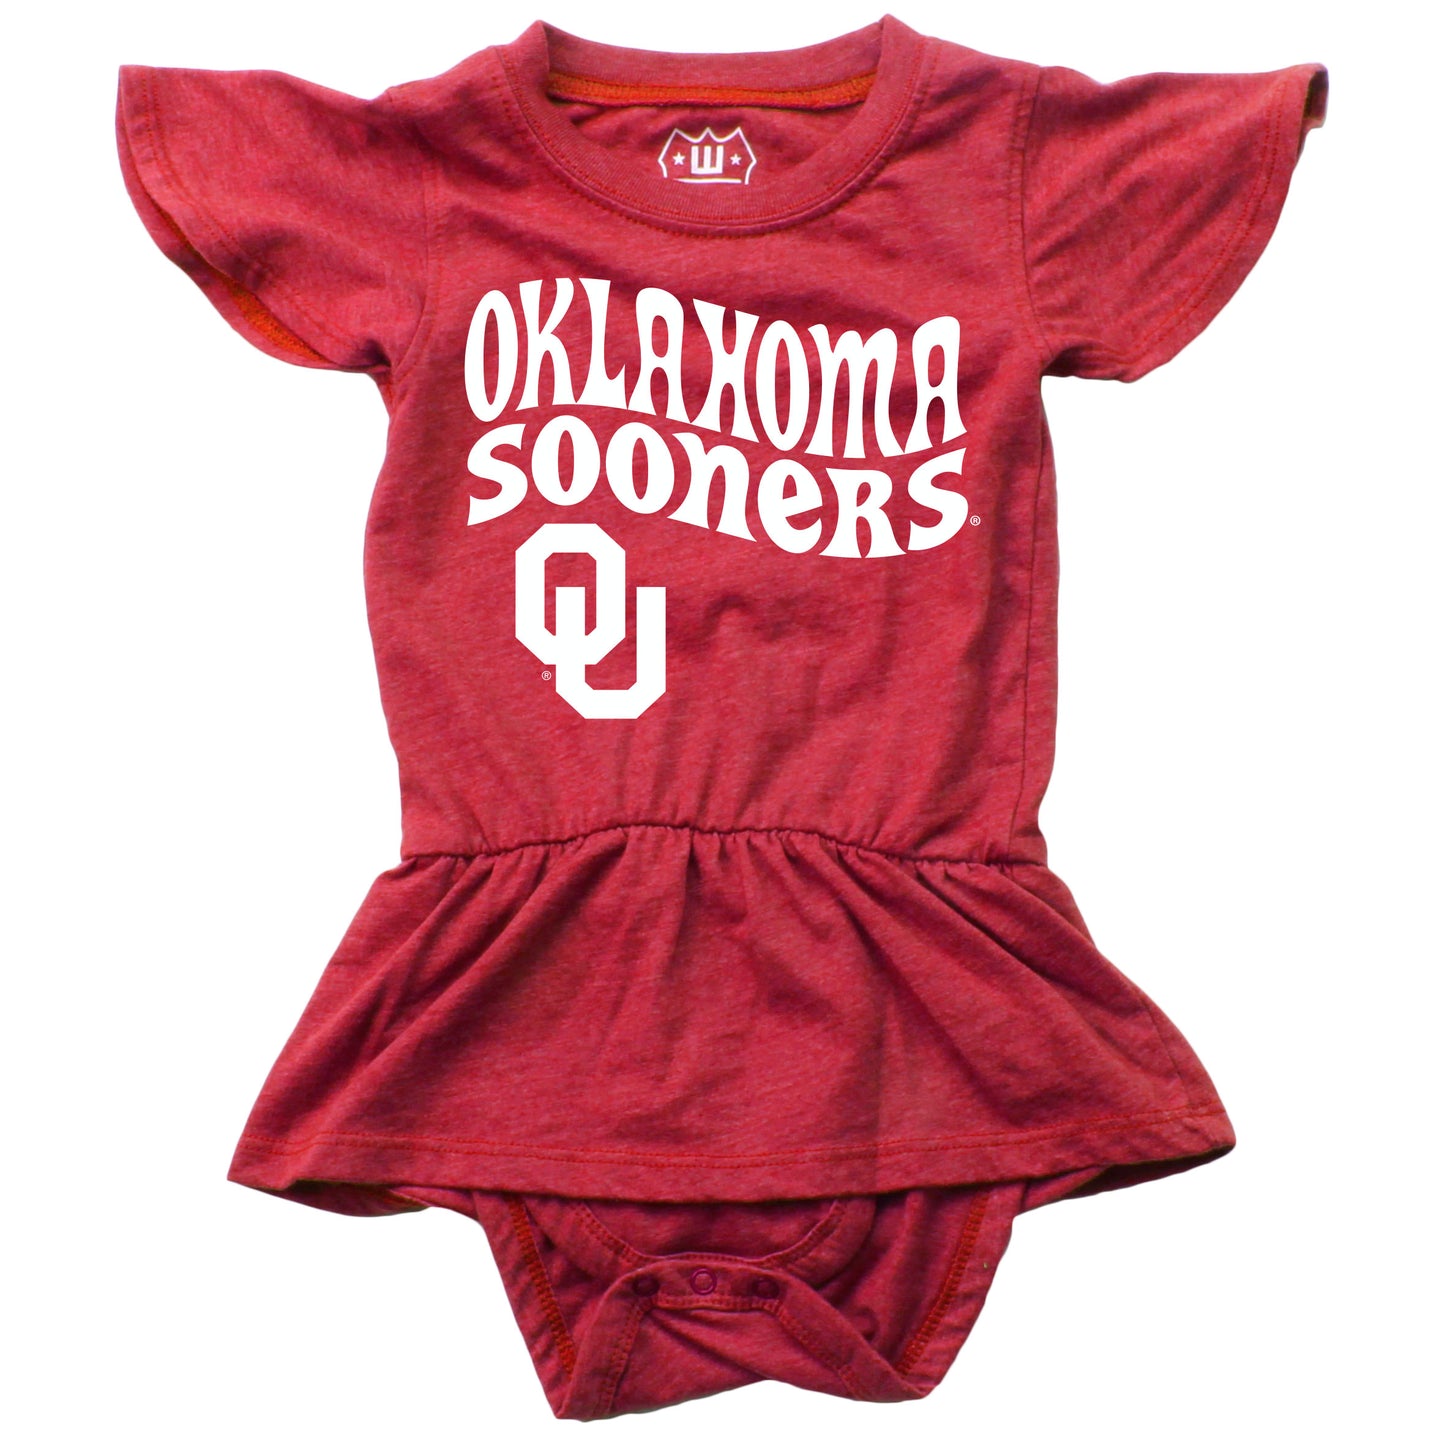 Oklahoma Sooners Wes and Willy Baby Girls College Team One Piece Hopper Skirt